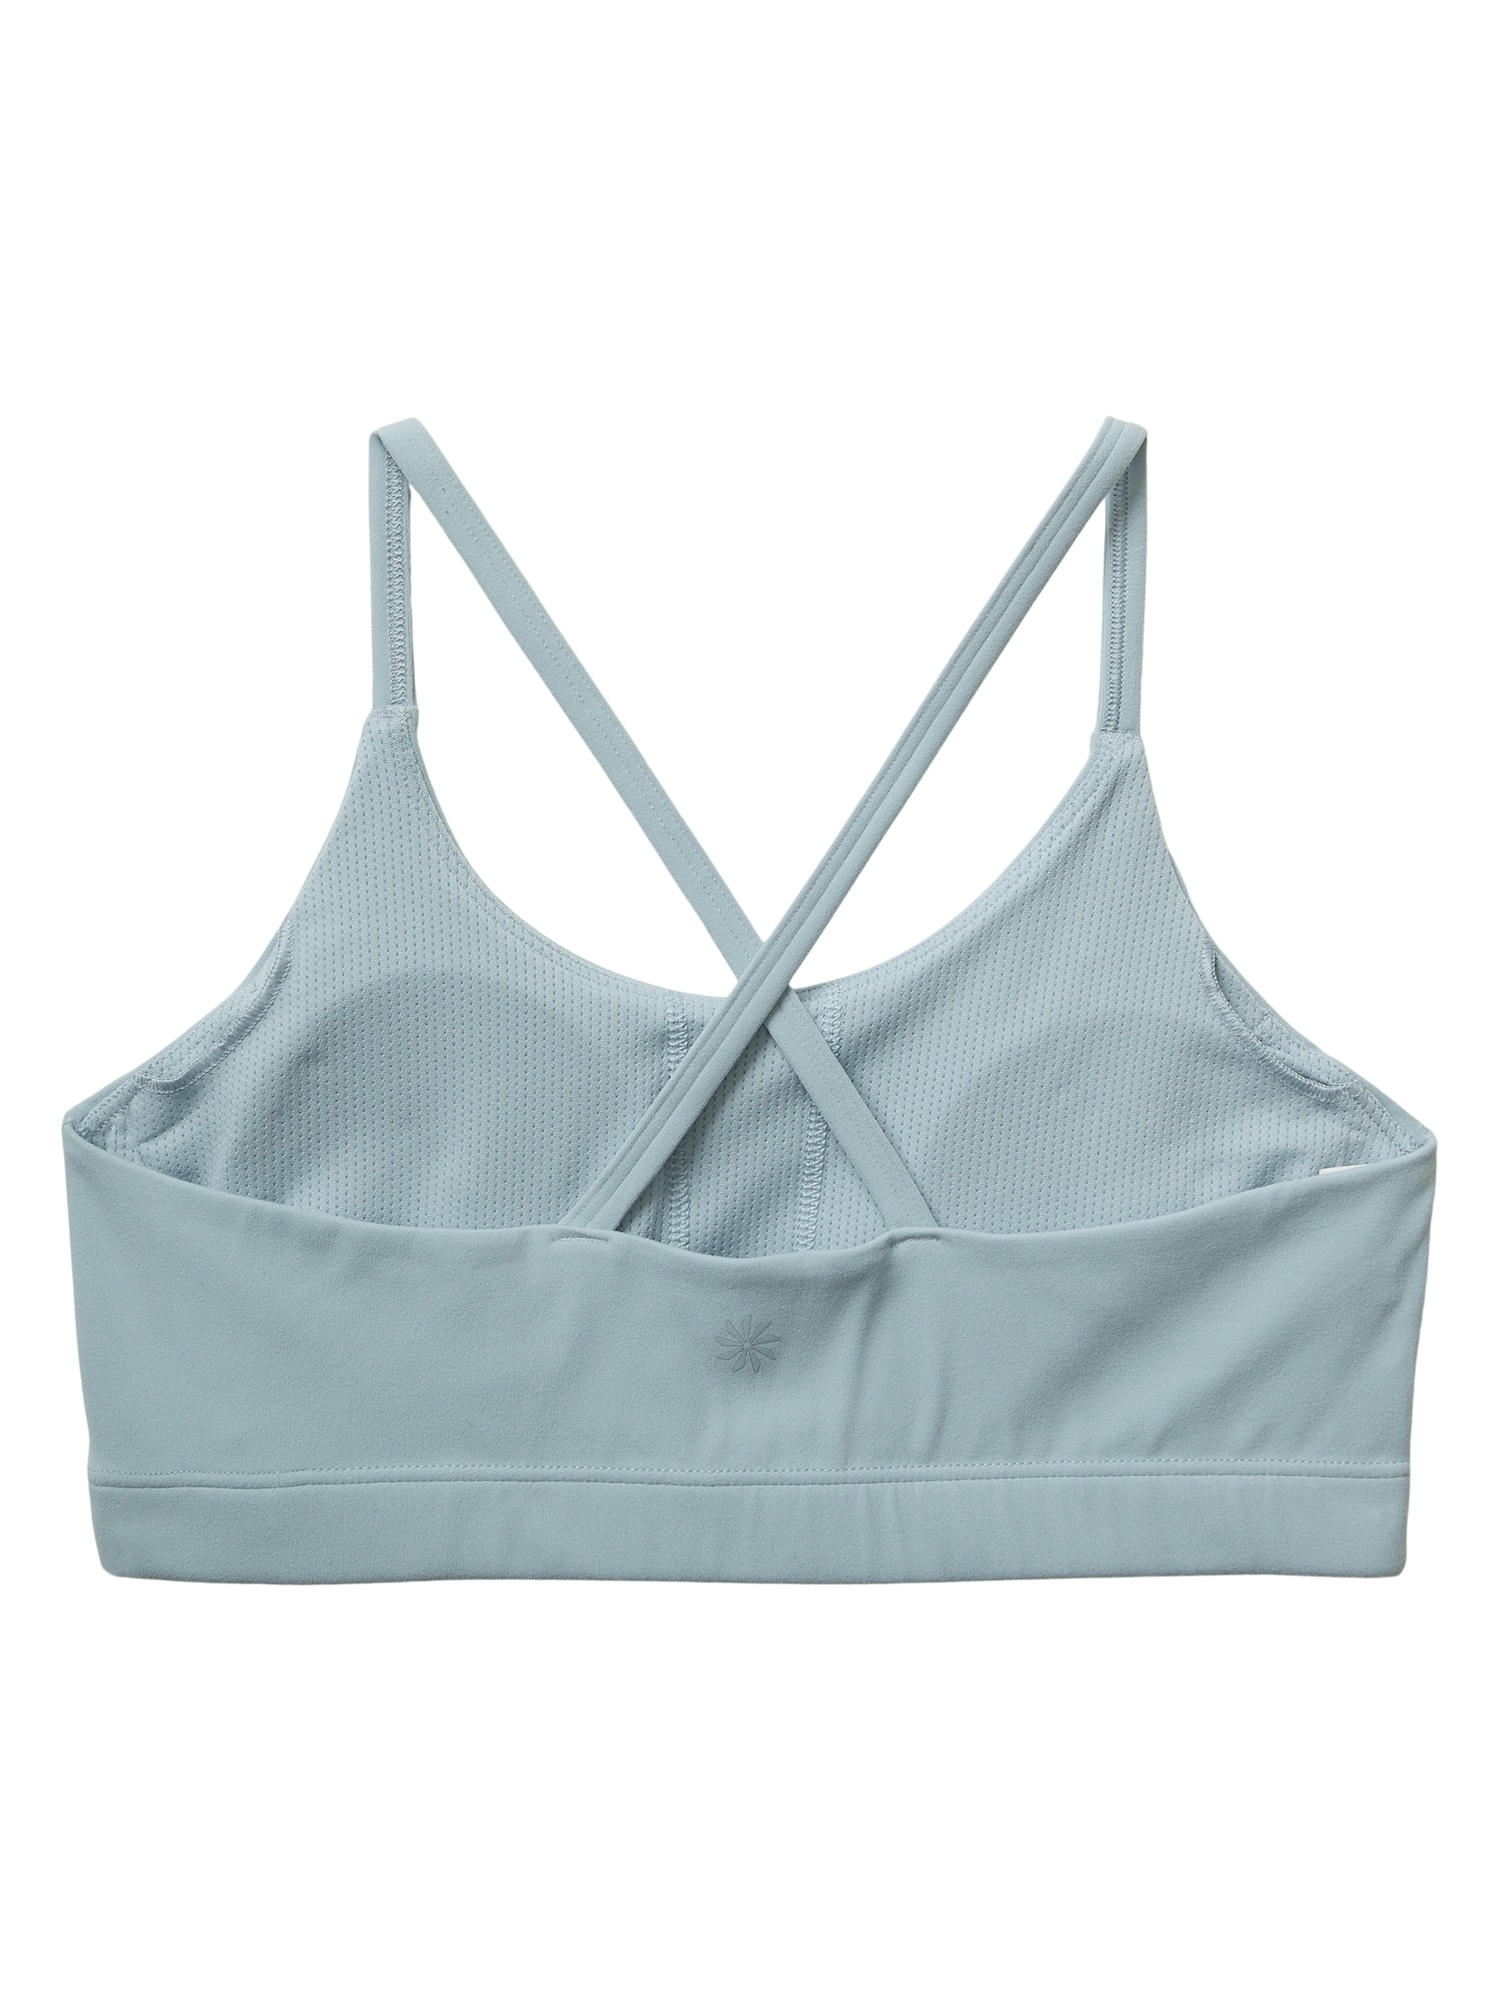 ATHLETA EMPOWER II DAILY SPORTS BRA A-C IN DOVETAIL TAUPE NWT